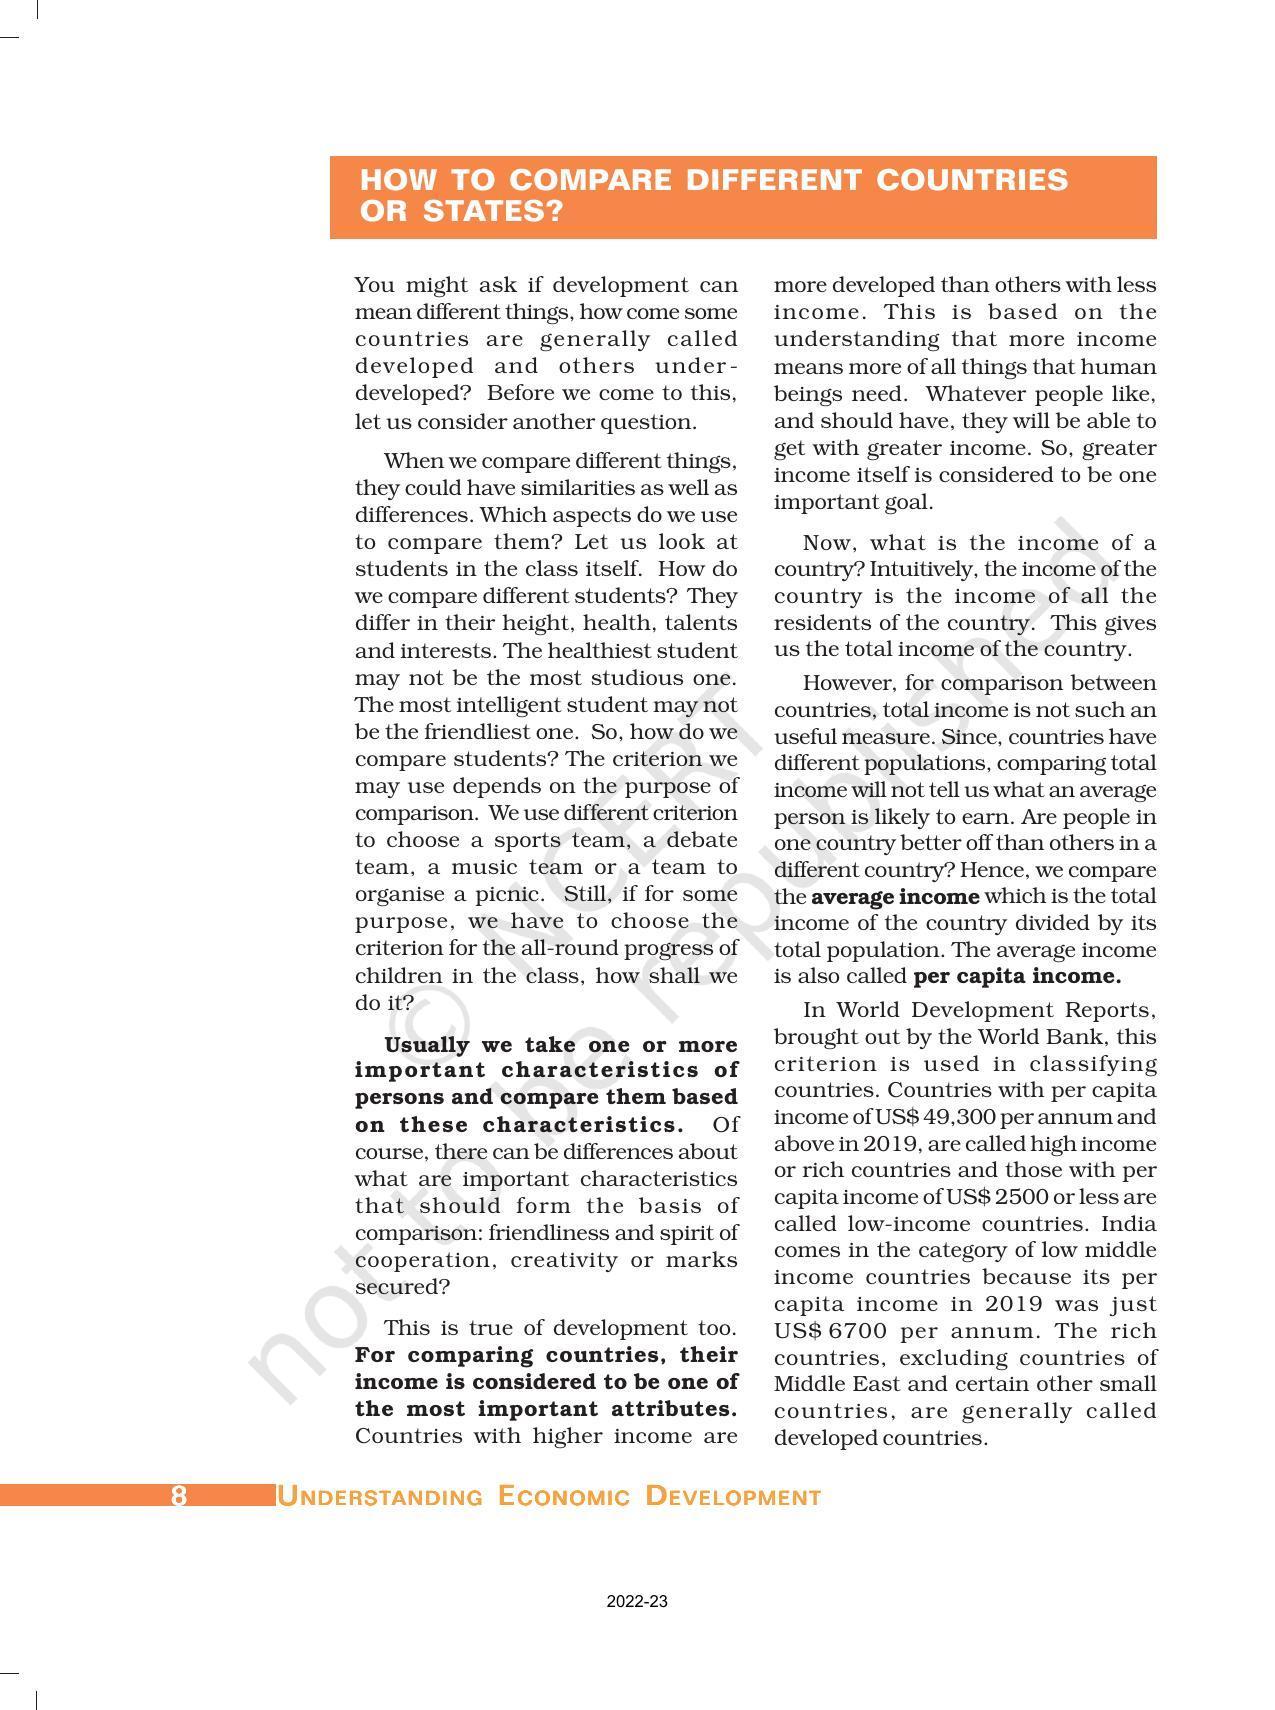 NCERT Book for Class 10 Economics Chapter 1 Development - Page 7